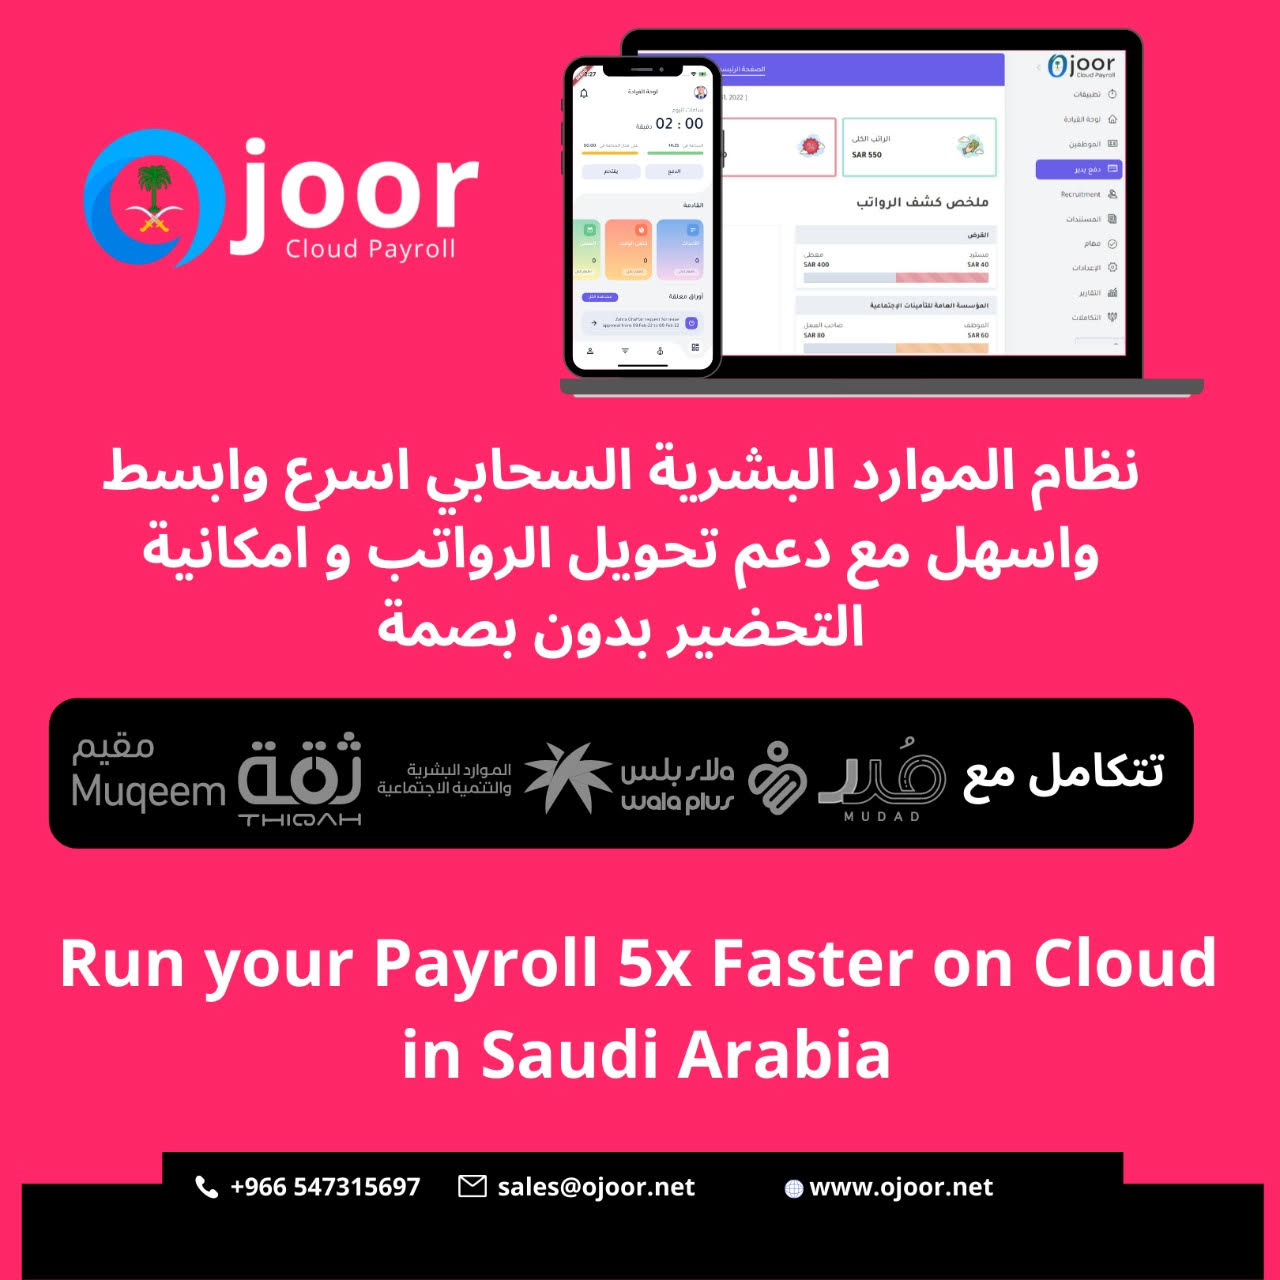 What are the Advantages of Outsourcing in Payroll Software in Saudi?